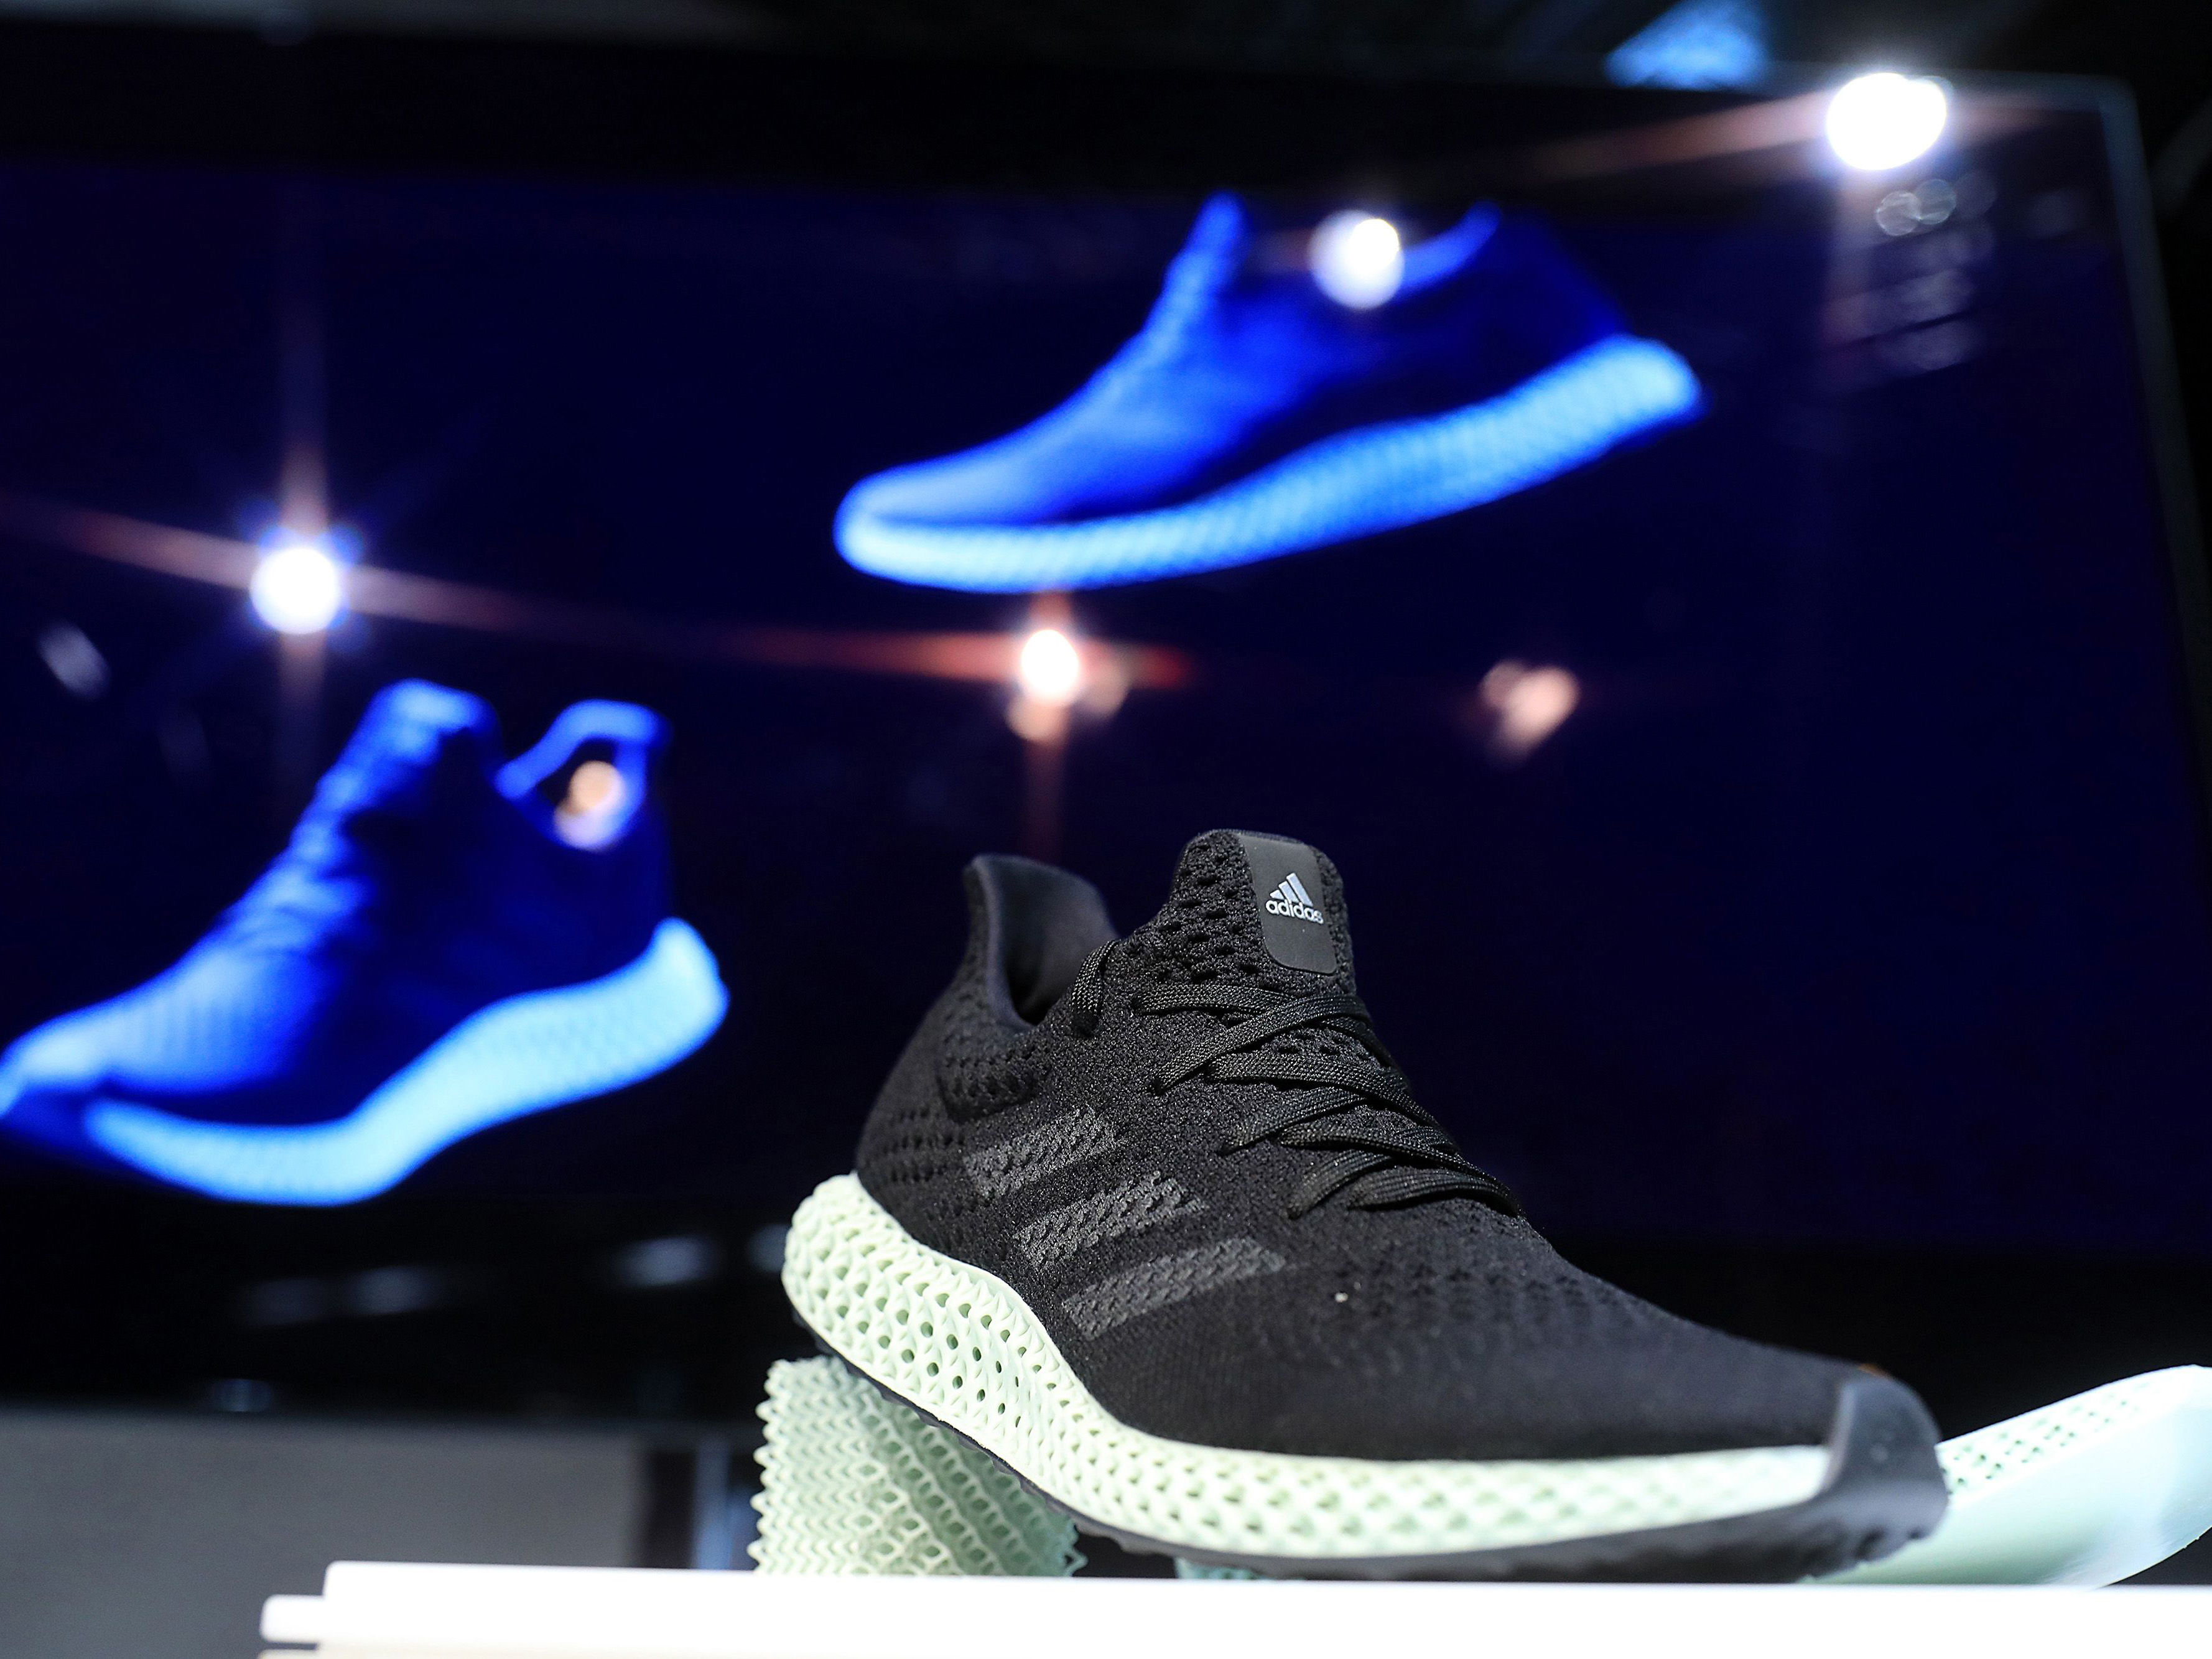 mecánico Bandido Deducir From Sneakers to Teslas, China Lockdowns Upend Global Supply Chains |  2022-05-16 | SupplyChainBrain